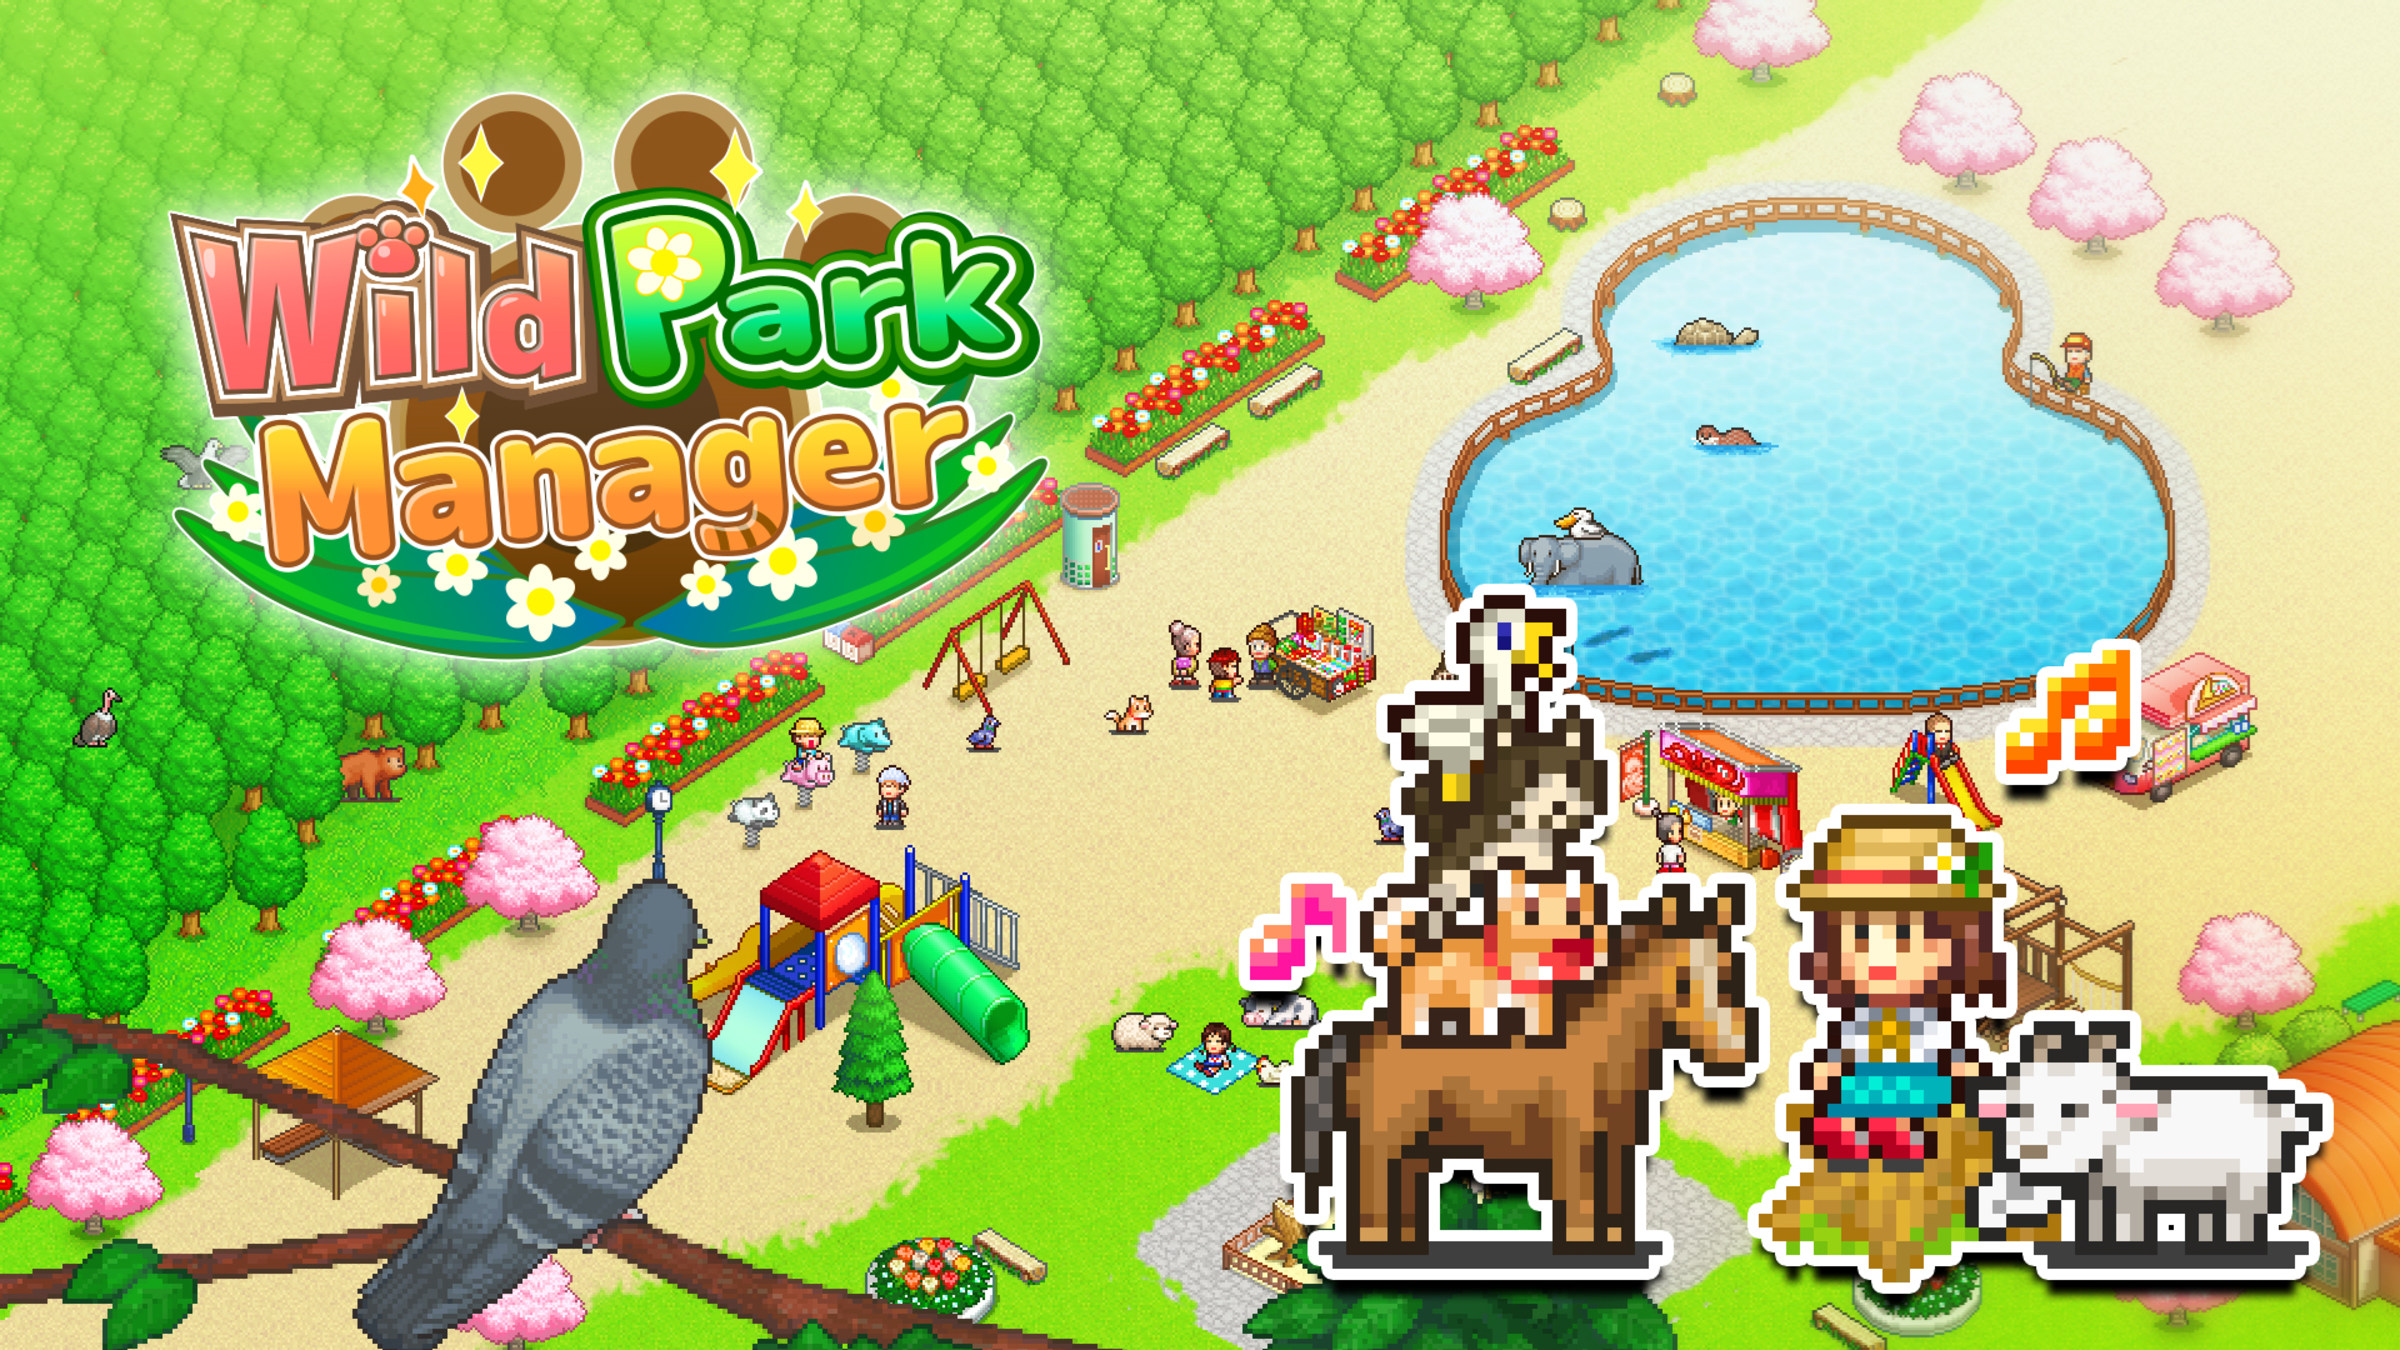 Wild Park Manager for Nintendo Switch - Nintendo Official Site